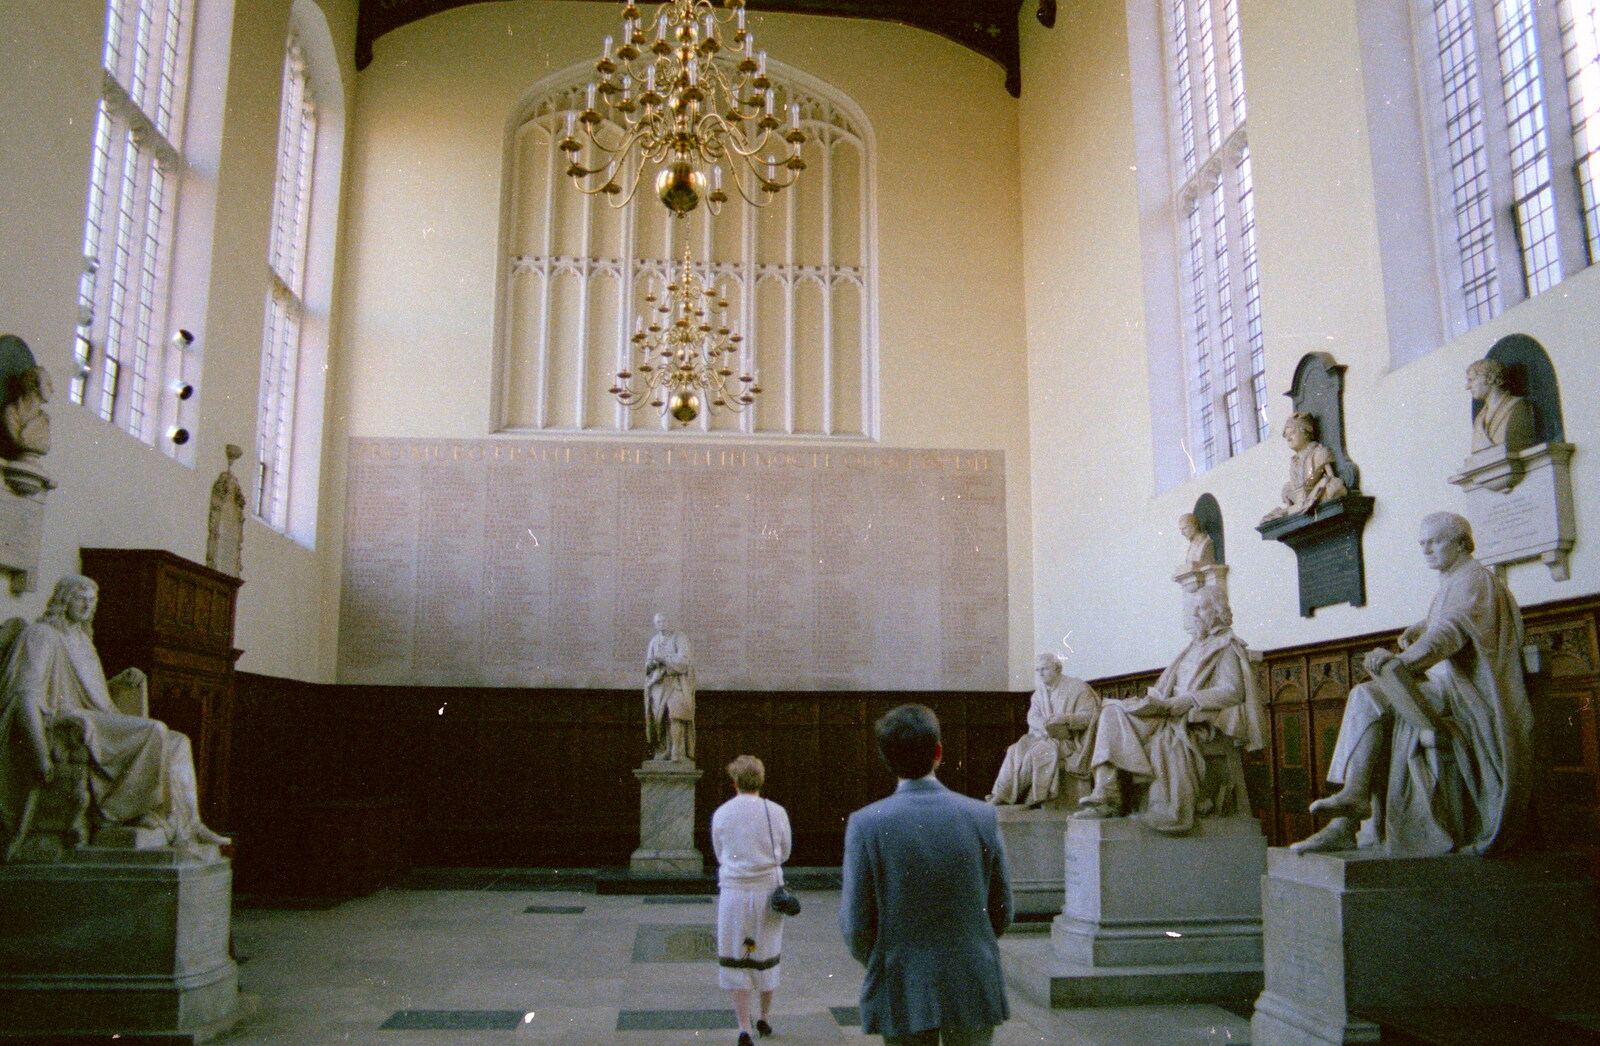 Anna and Phil roam around in Trinity Chapel from A Trip to Trinity College, Cambridge - 23rd March 1986